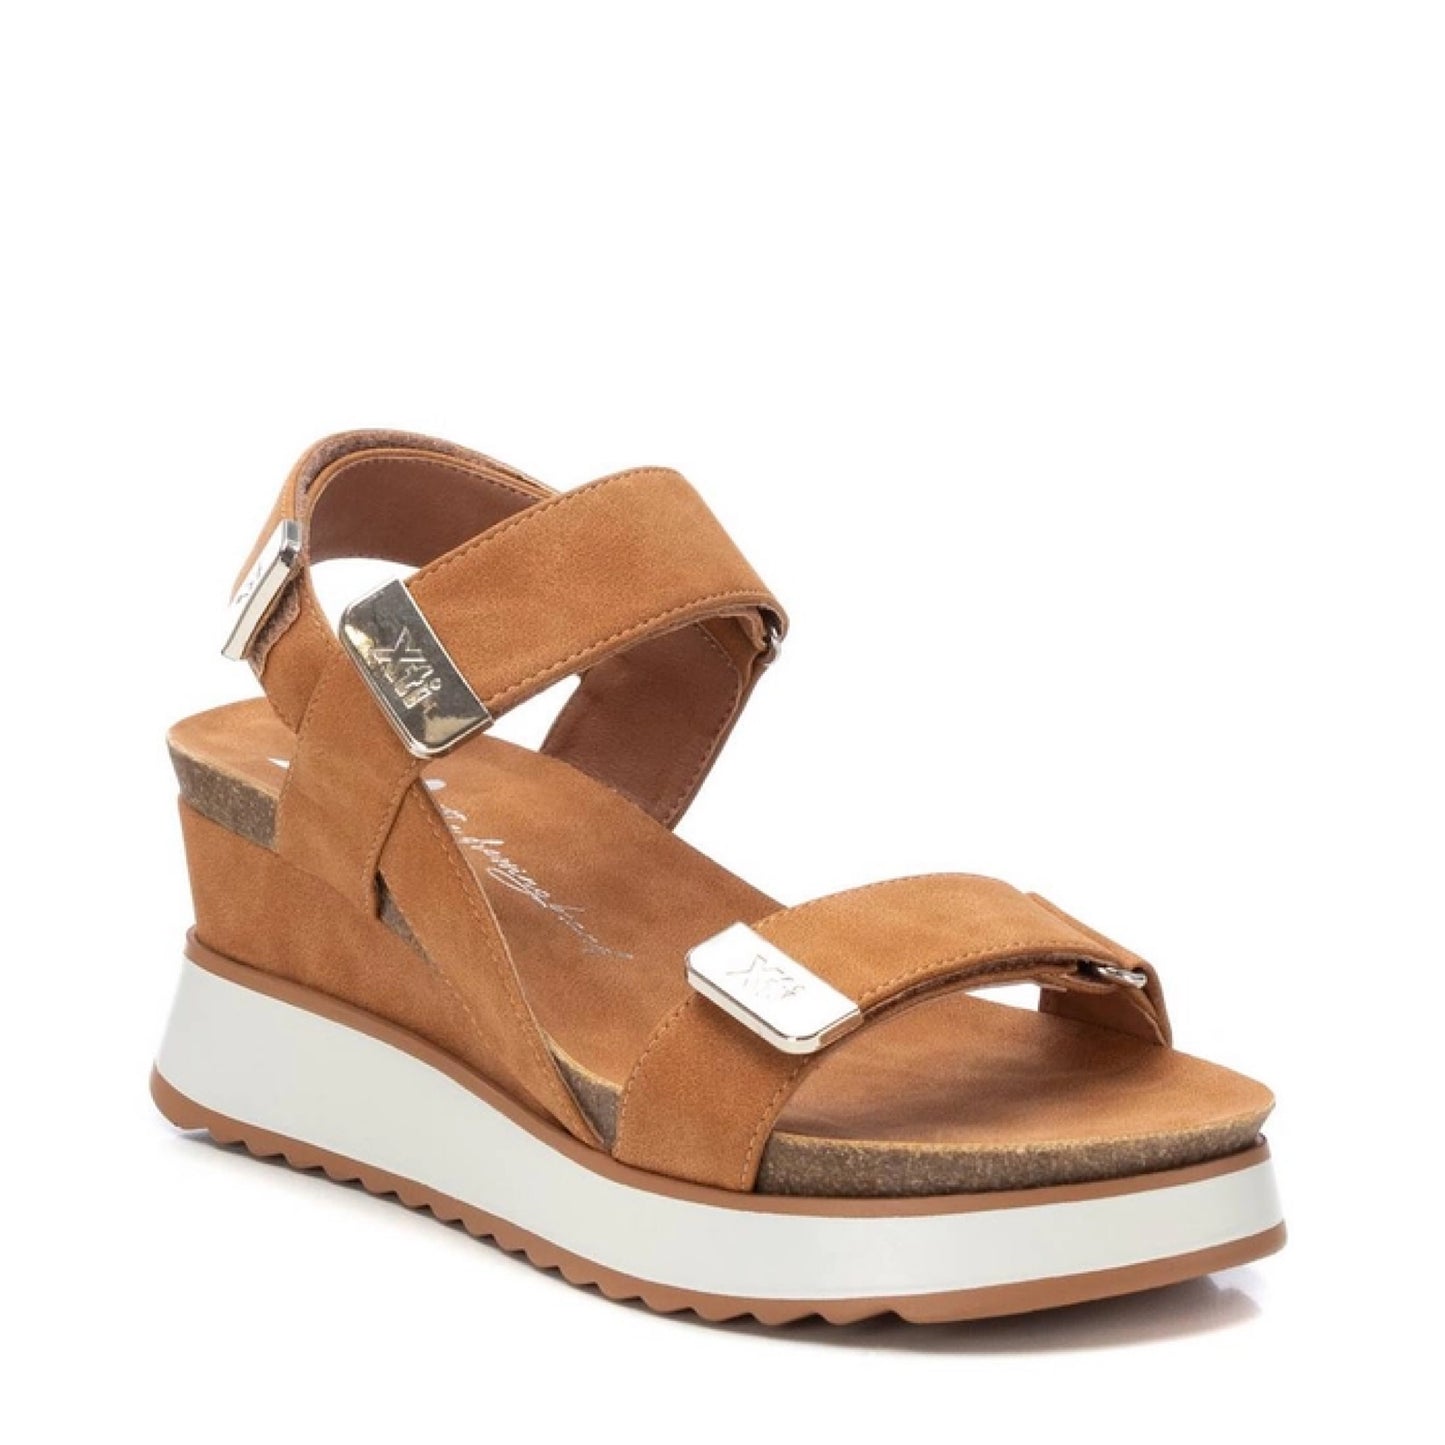 XTI Camel Wedge